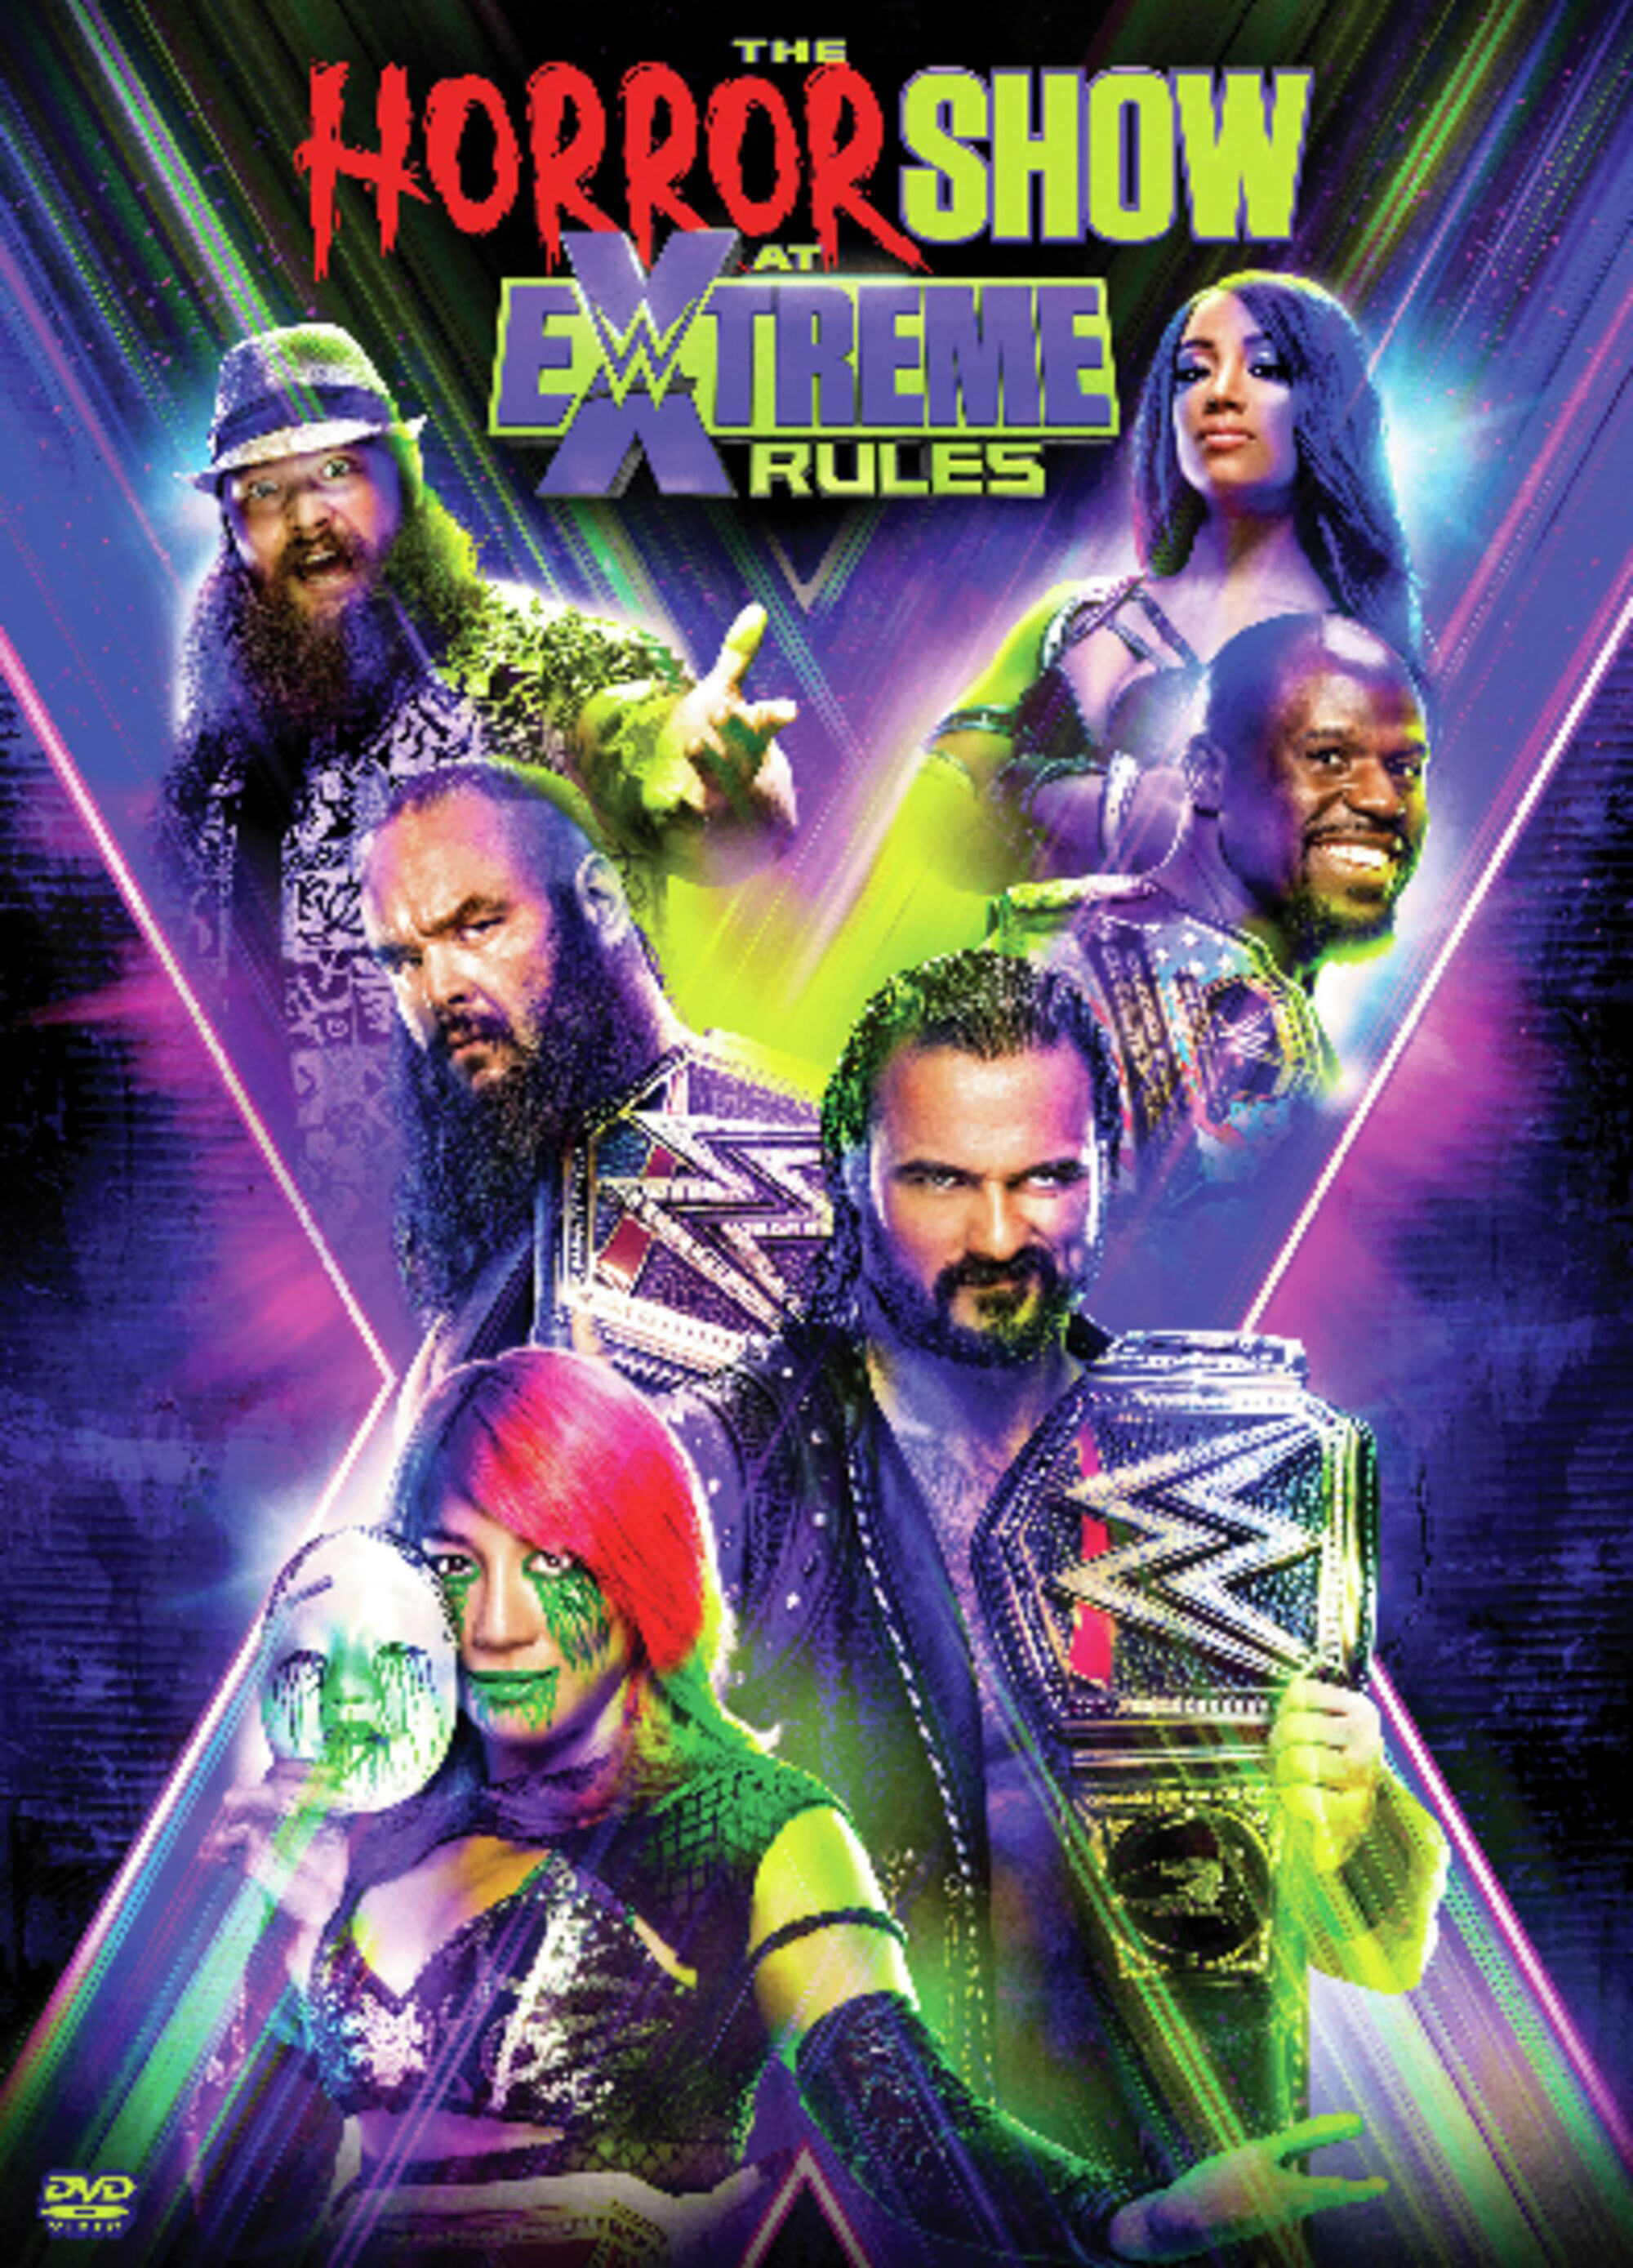 Wwe Extreme Rules Dvd Best Buy